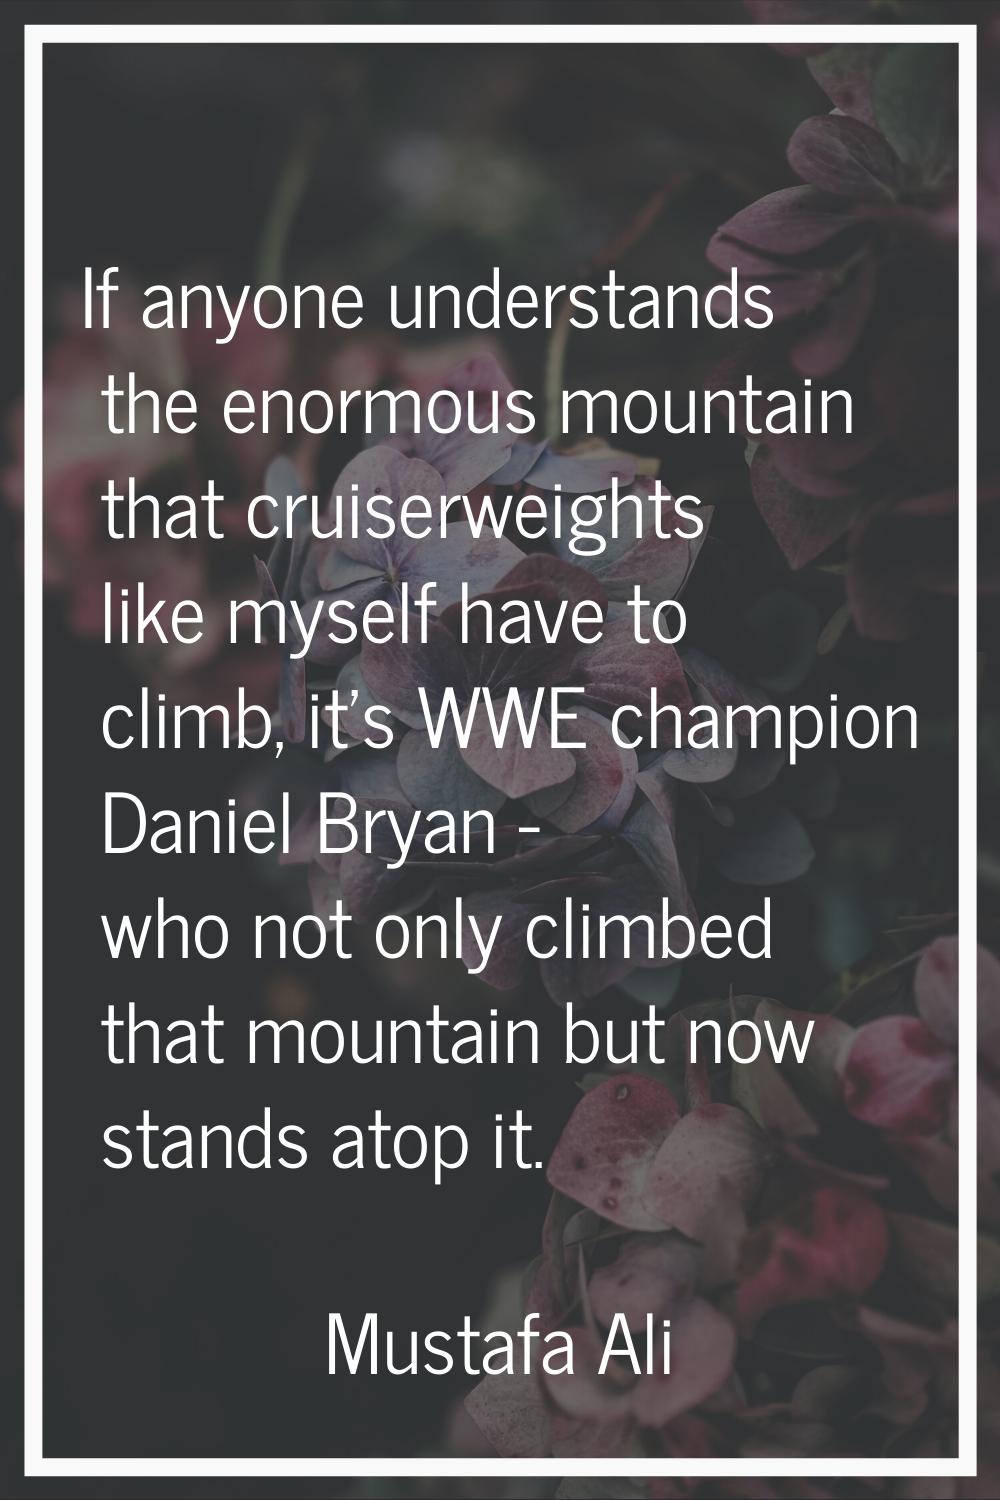 If anyone understands the enormous mountain that cruiserweights like myself have to climb, it's WWE